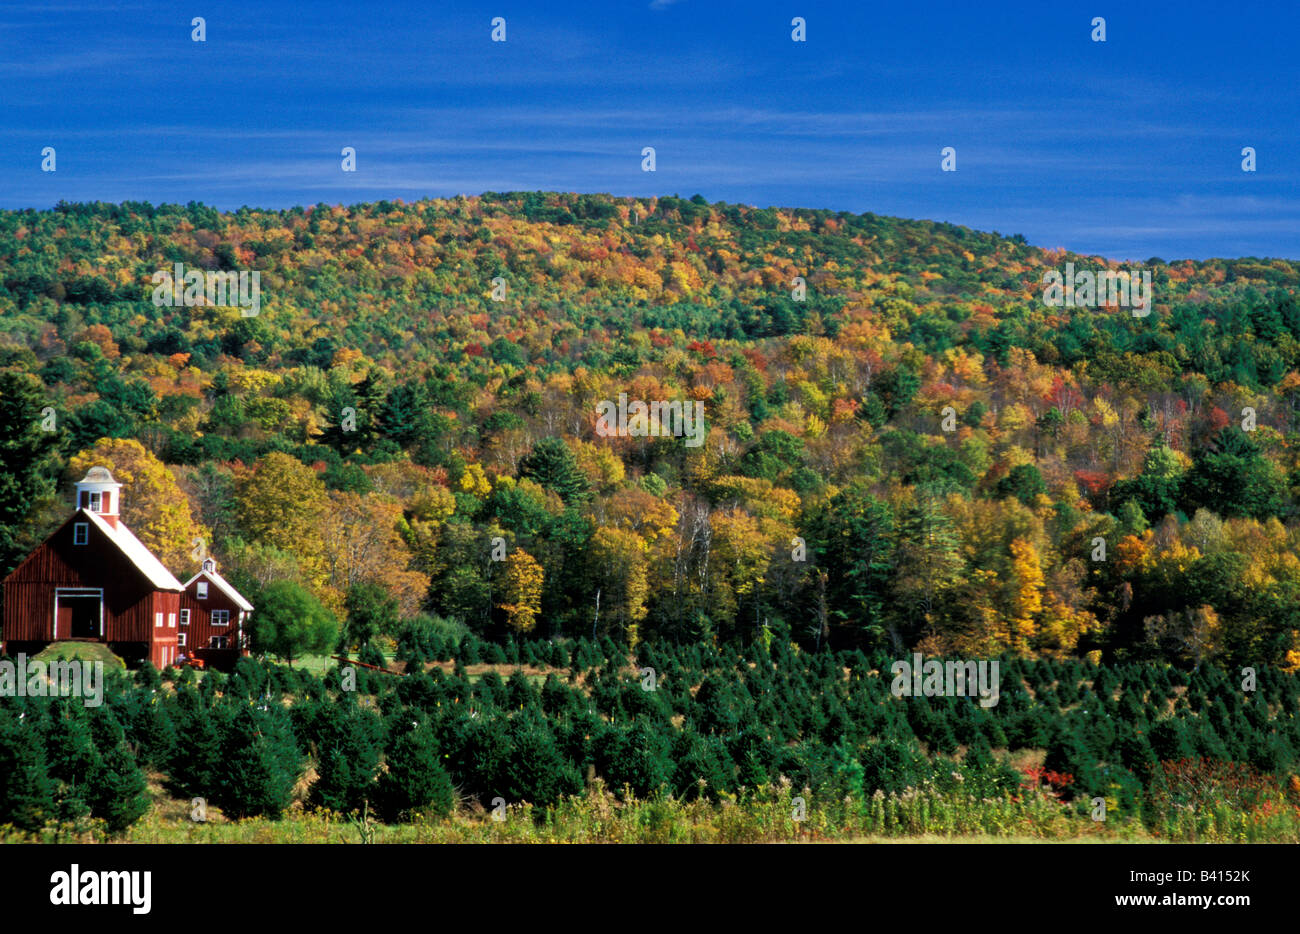 North America, United States, Vermont. Christmas tree farm with a red barn. Stock Photo